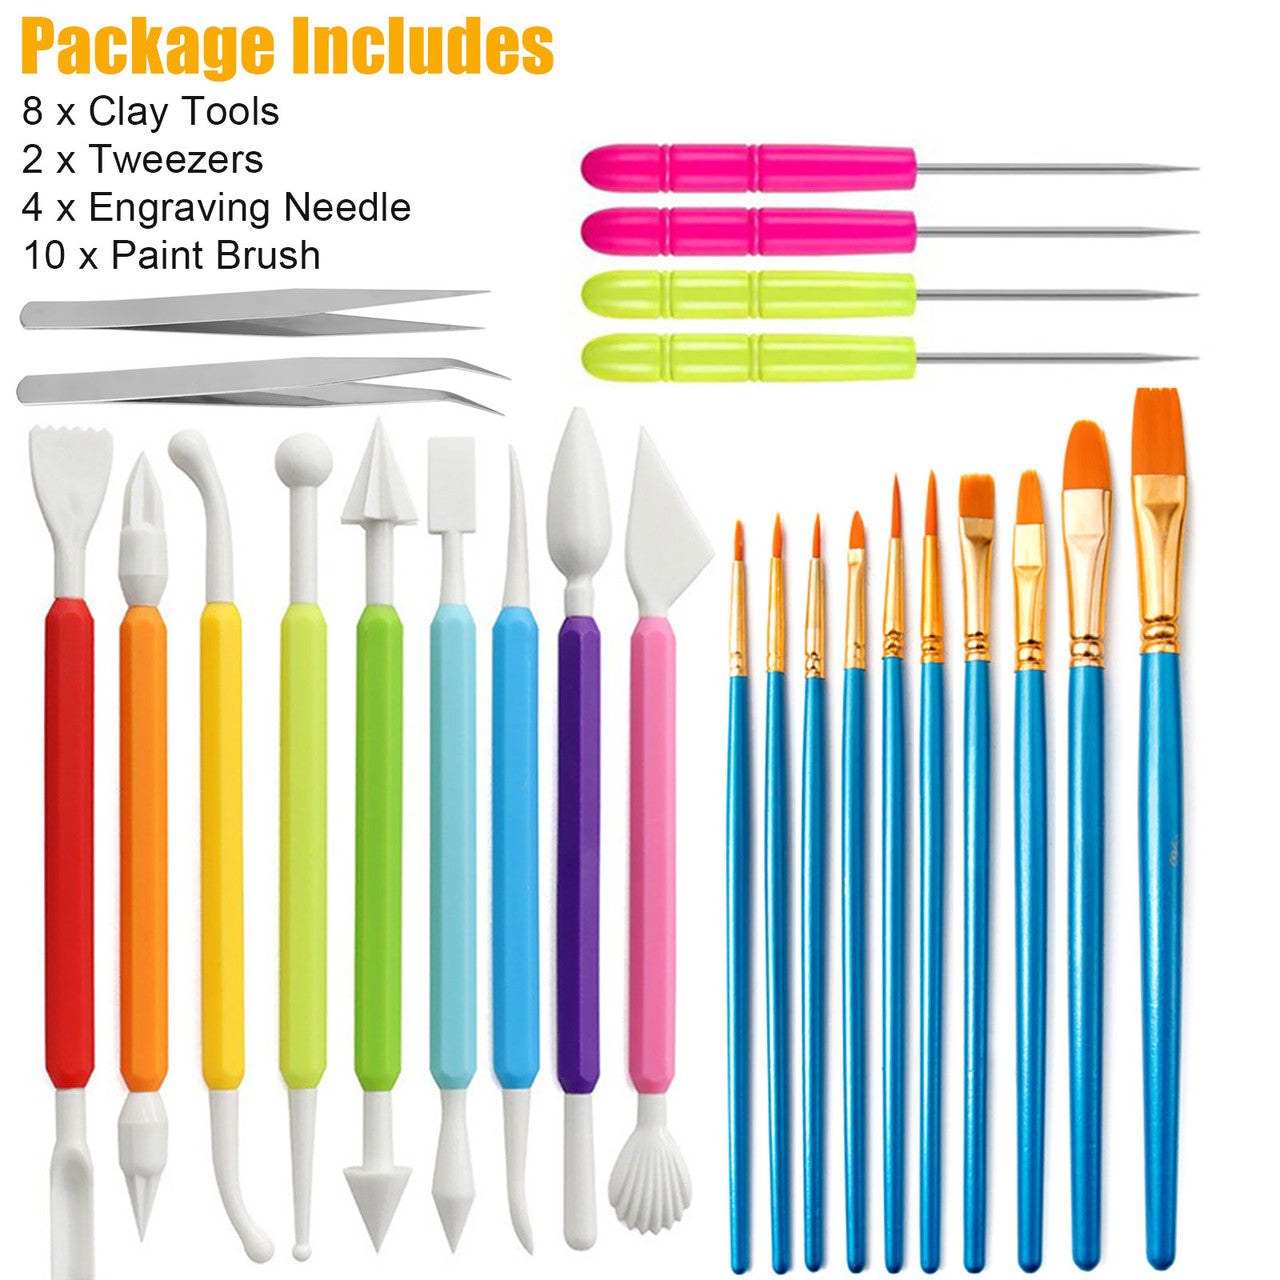 25 Packs Paint Brush Pottery Tool Set - Clay Tools Clay Sculpting Modeling Tools